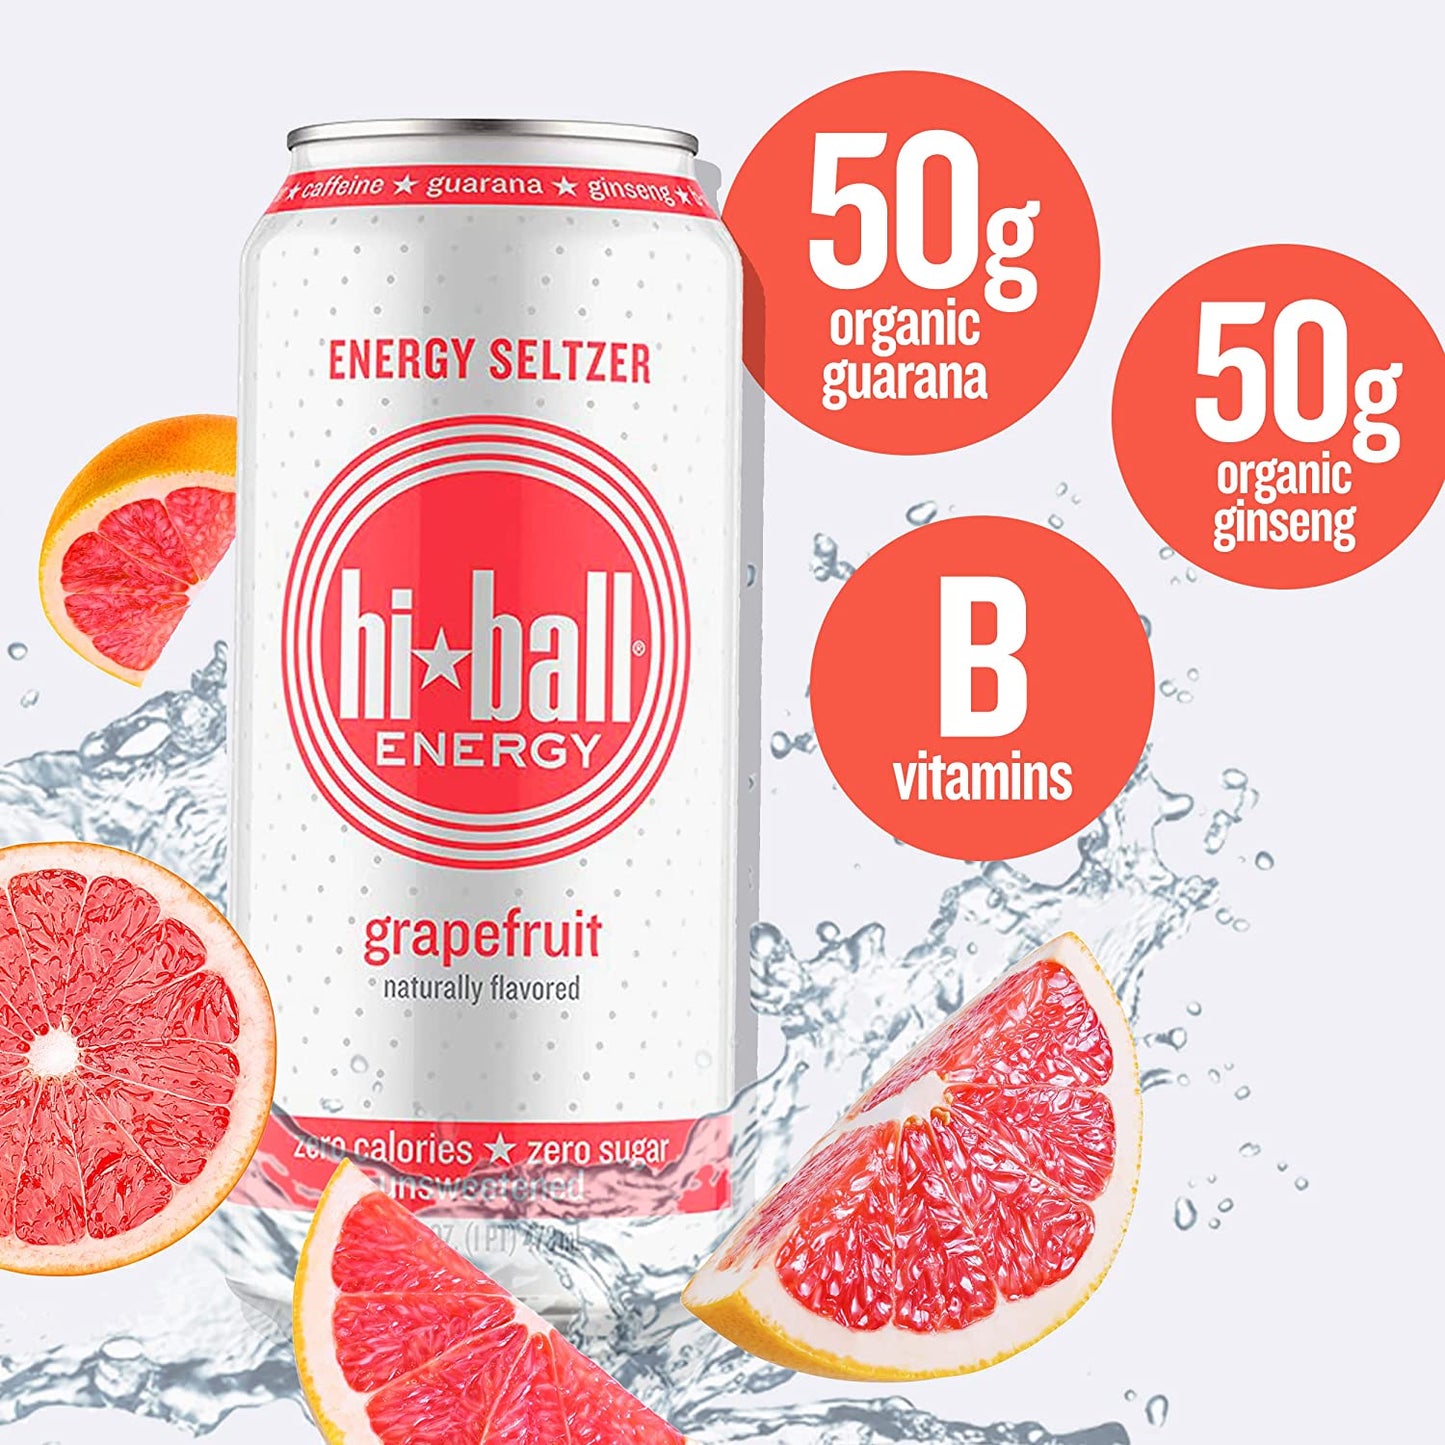 Hiball Energy Seltzer Water, Caffeinated Sparkling Water Made with Vitamin B12 and Vitamin B6, Sugar Free (8 pack of 16 Fl Oz), Grapefruit